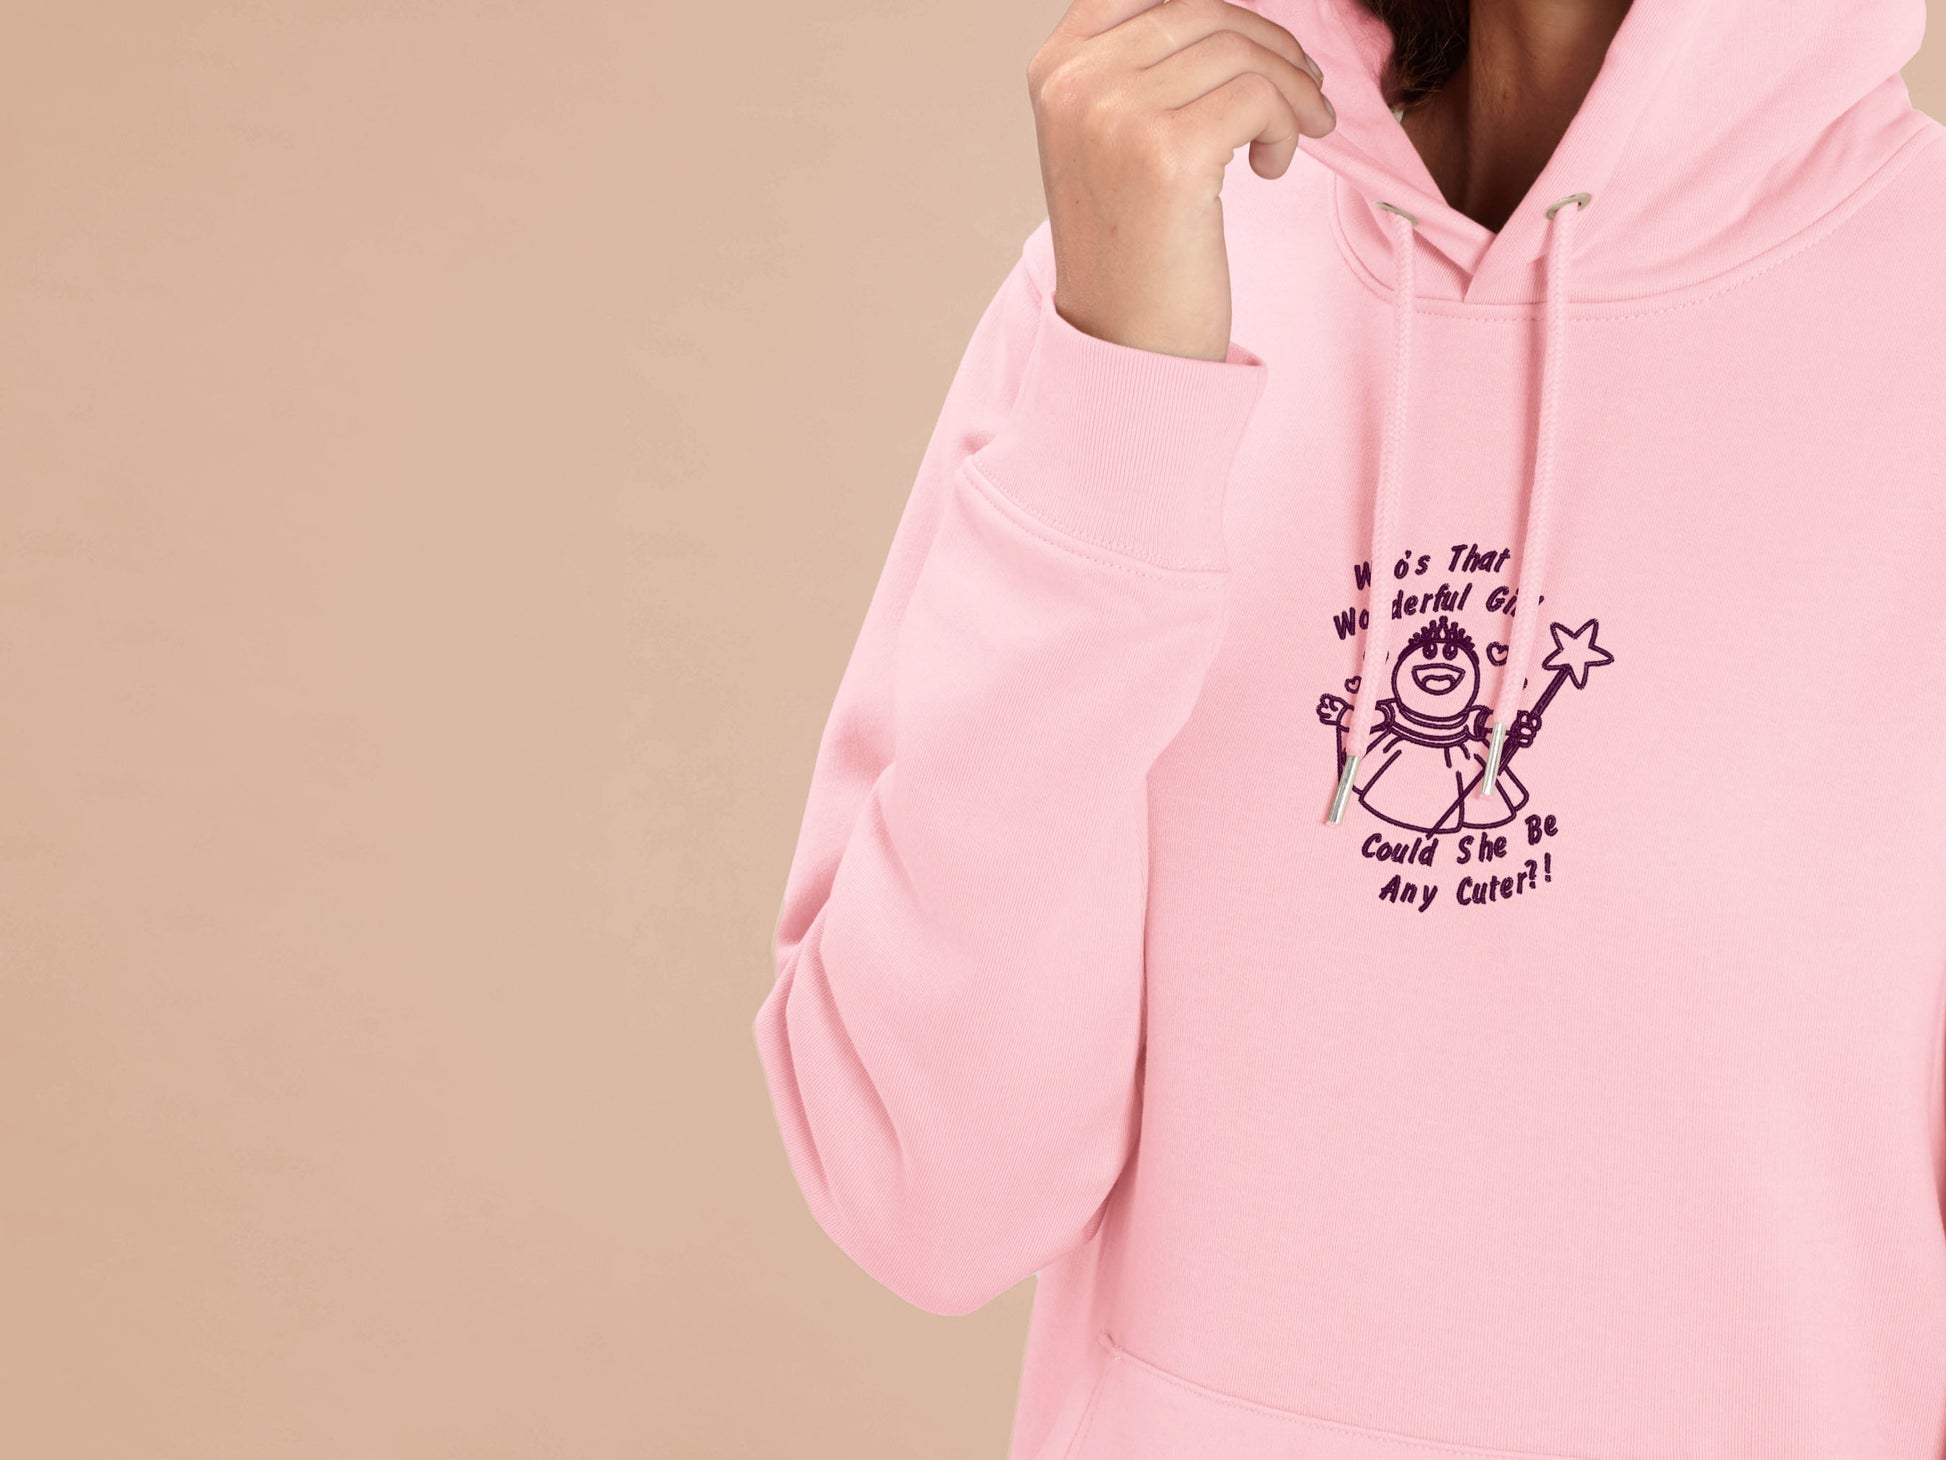 An embroidered fleece hoodie design of Mona from the puppet show Nanalan in a princess dress with the text Who's That Wonderful Girl, Could She Be Any Cuter?!